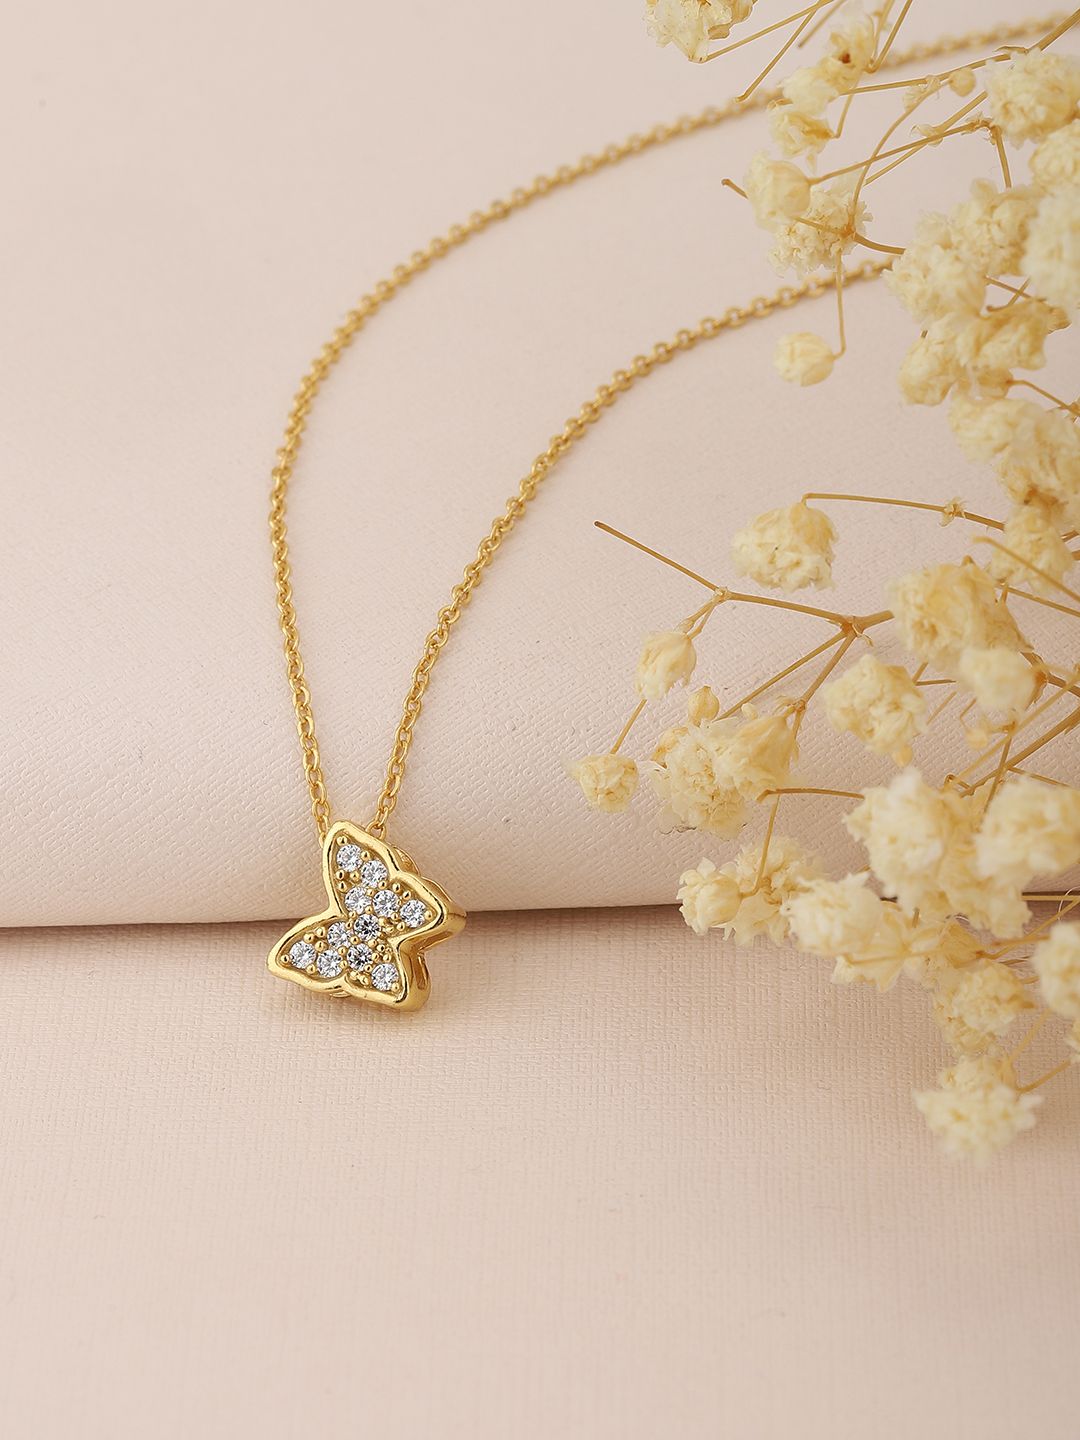 Carlton London Rose Gold-Plated CZ-Studded Butterfly Shaped Necklace Price in India